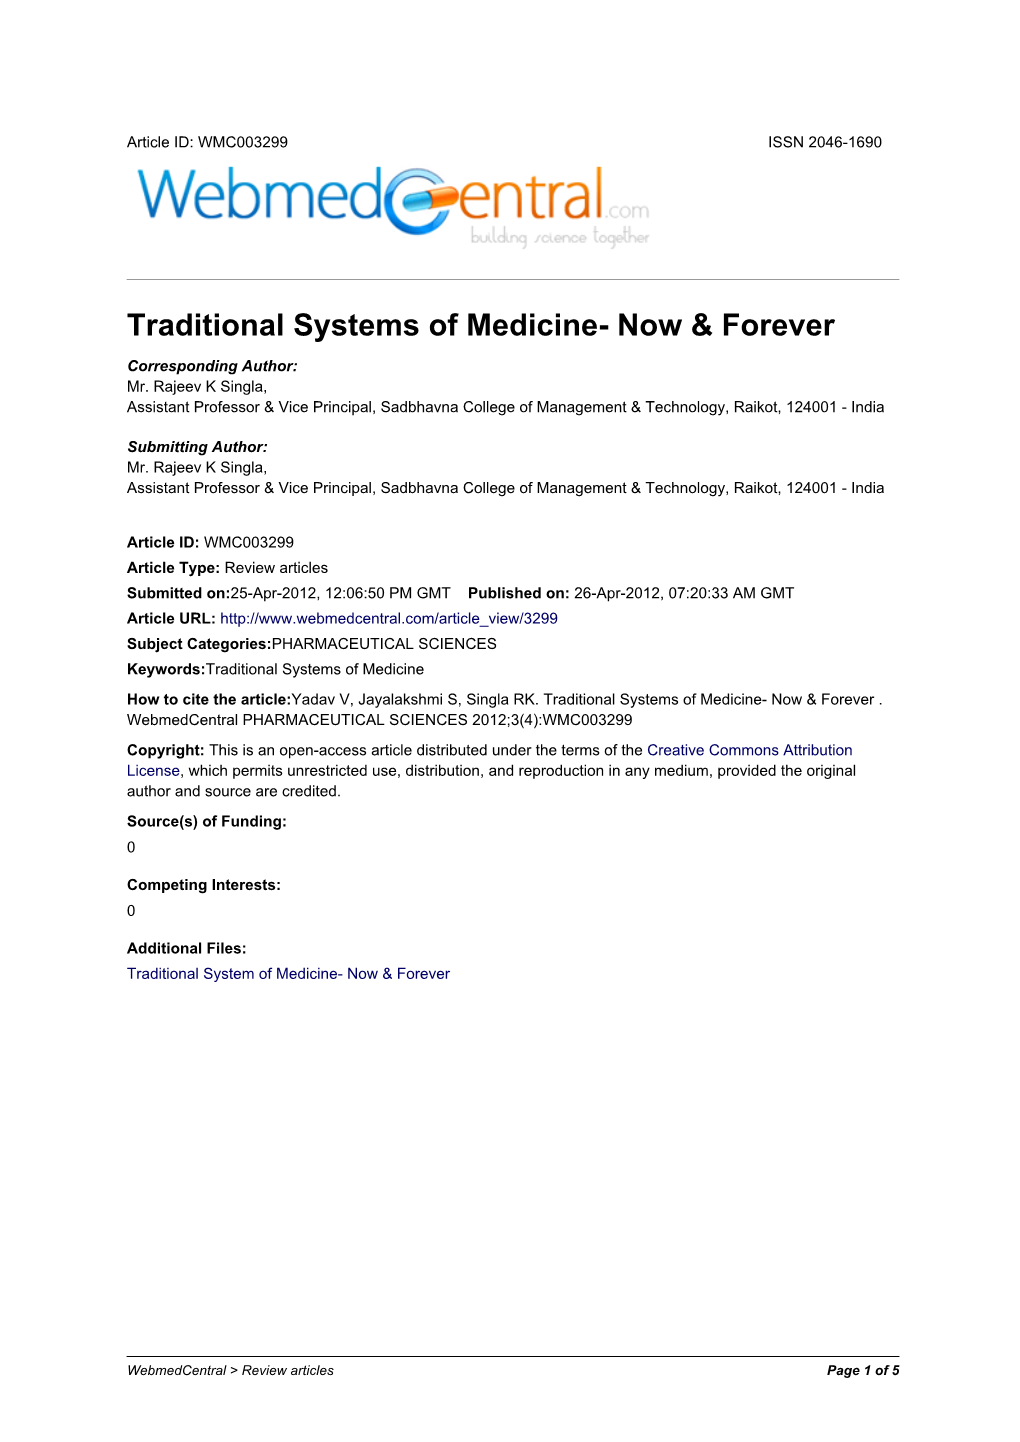 Traditional Systems of Medicine- Now & Forever